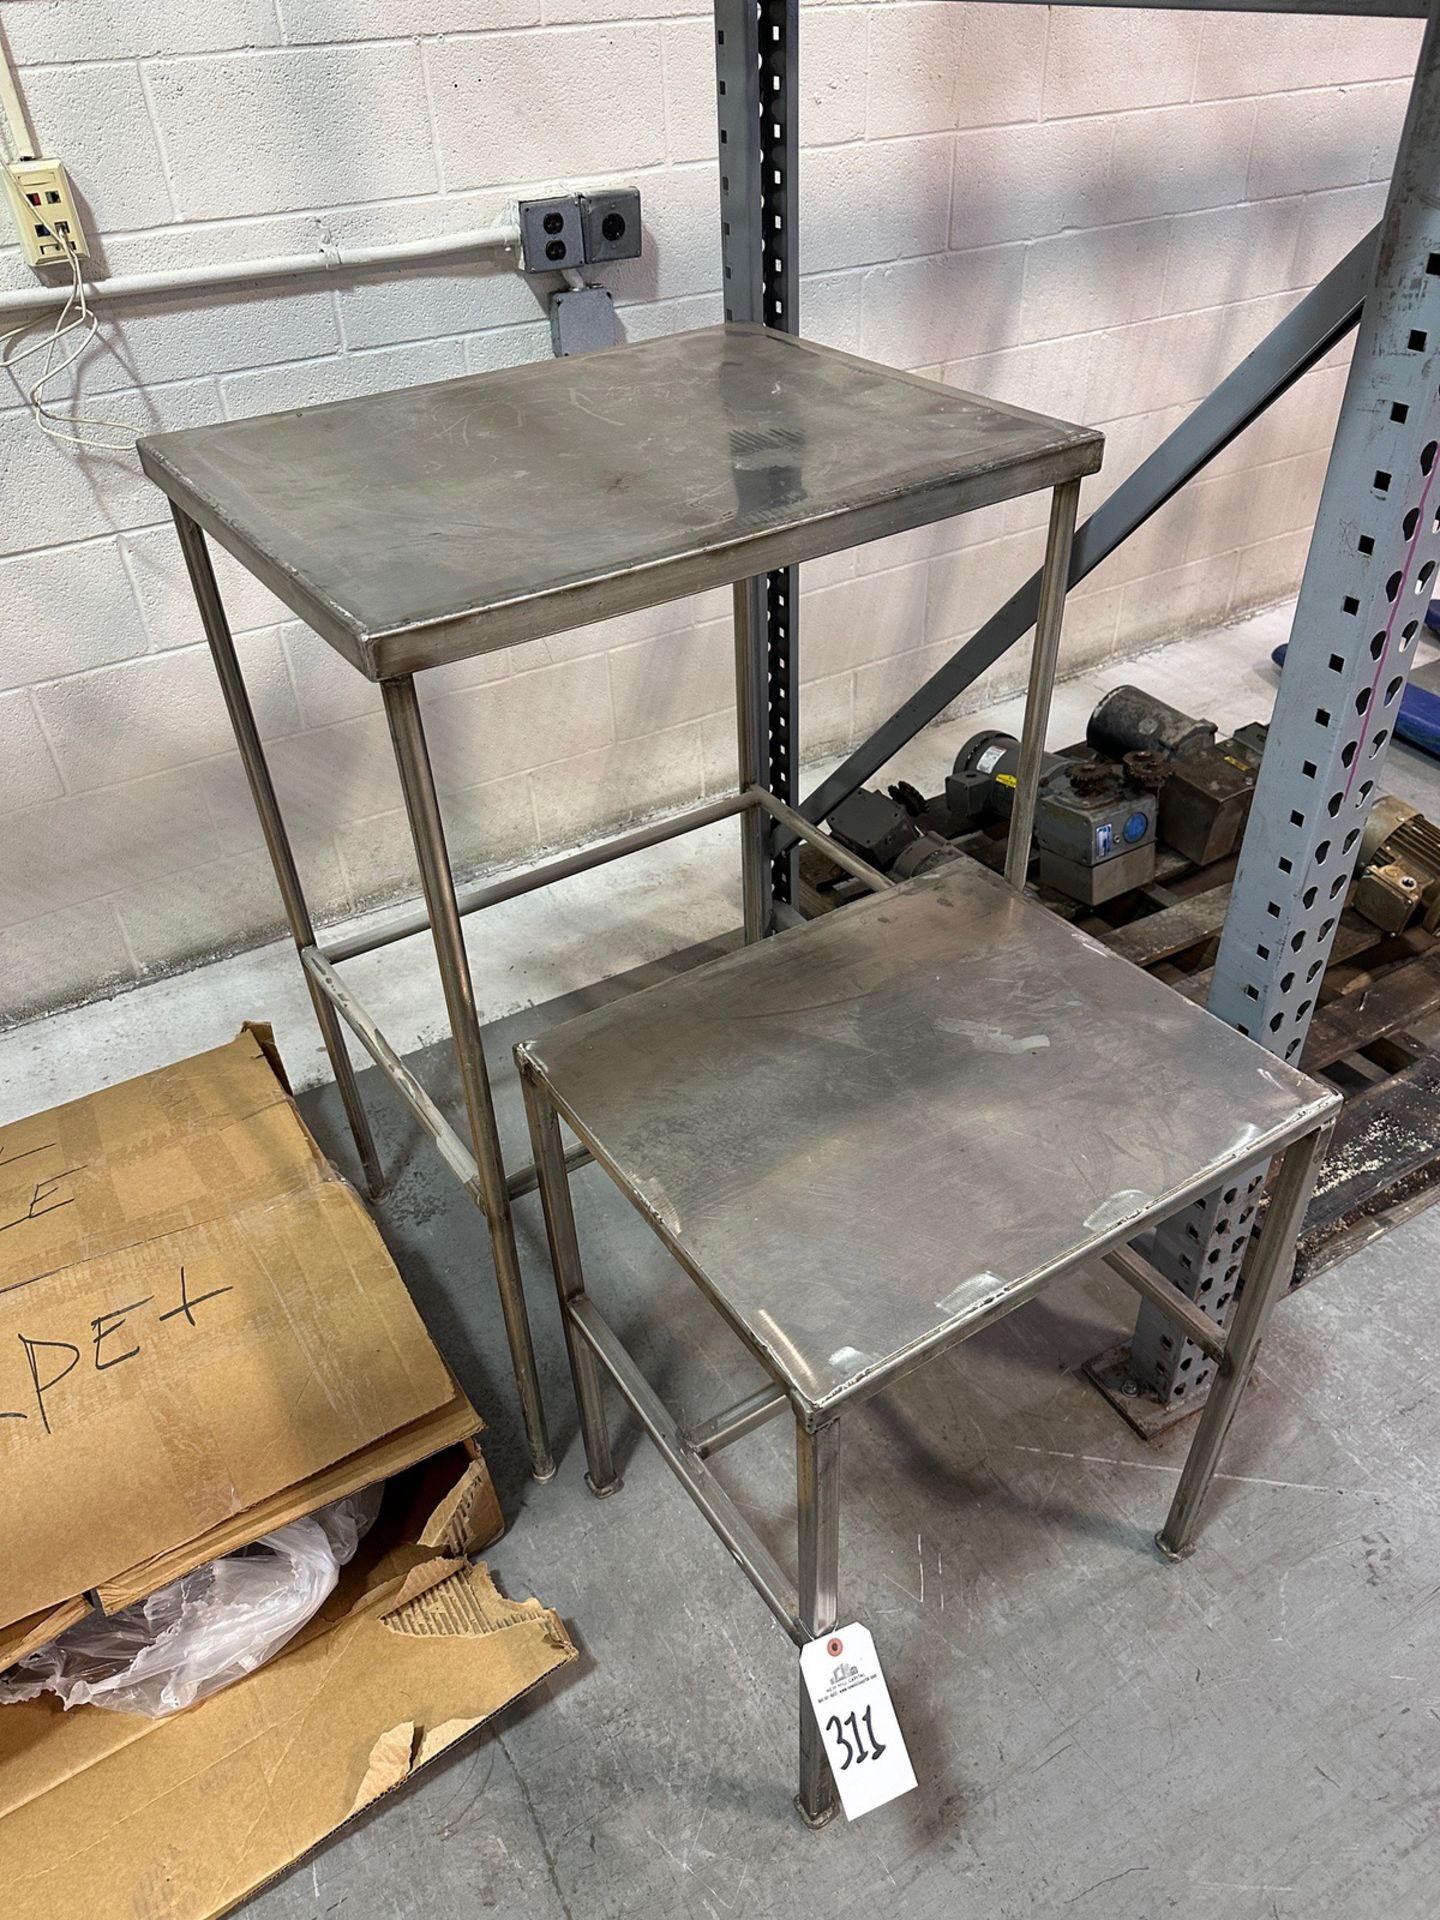 Lot of (2) Stainless Steel Tables (Approx. 19" x 22" and 24" x 30") | Rig Fee $35